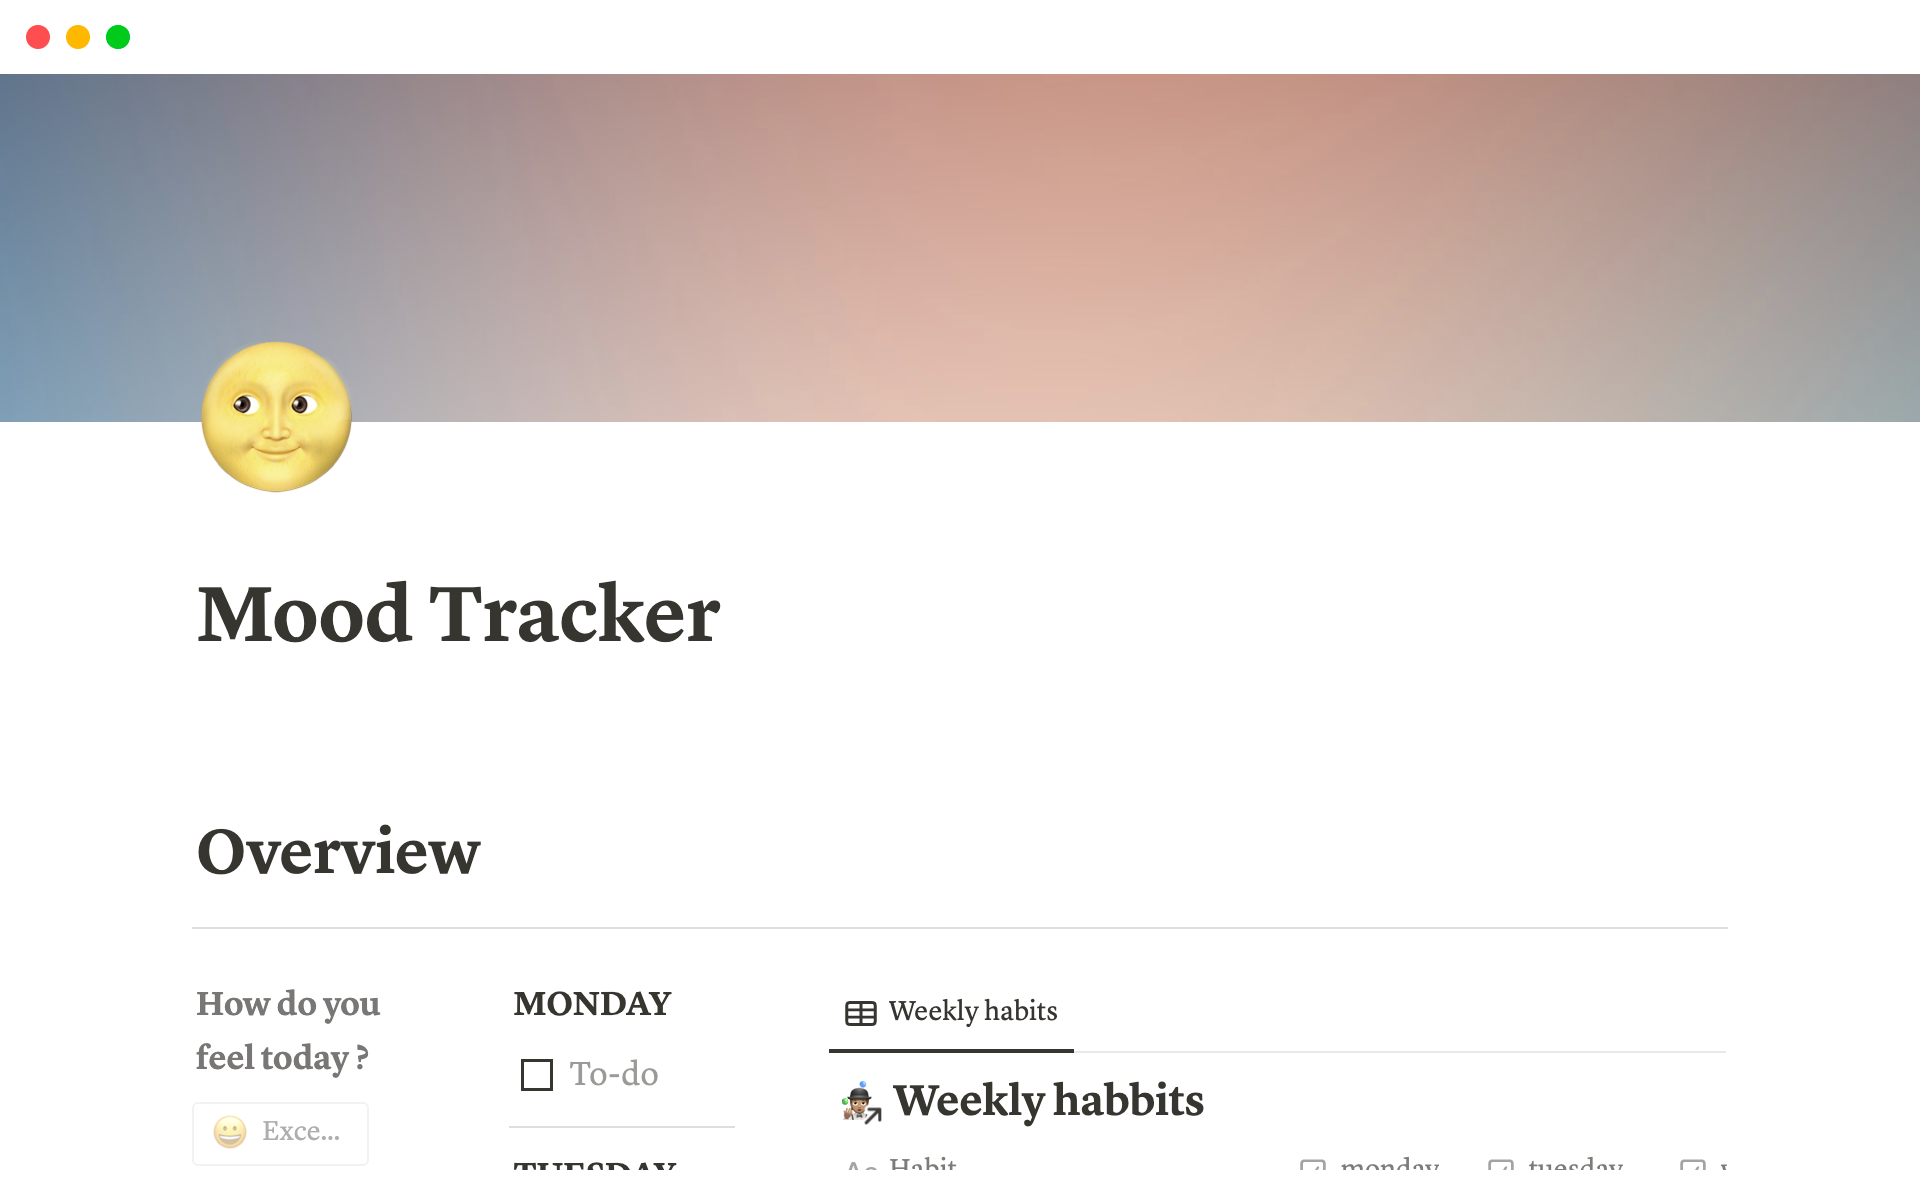 The Mood and Habit Tracking Notion Template is a customizable tool designed to help users track their daily habits and moods, set goals, and monitor their progress towards achieving them.